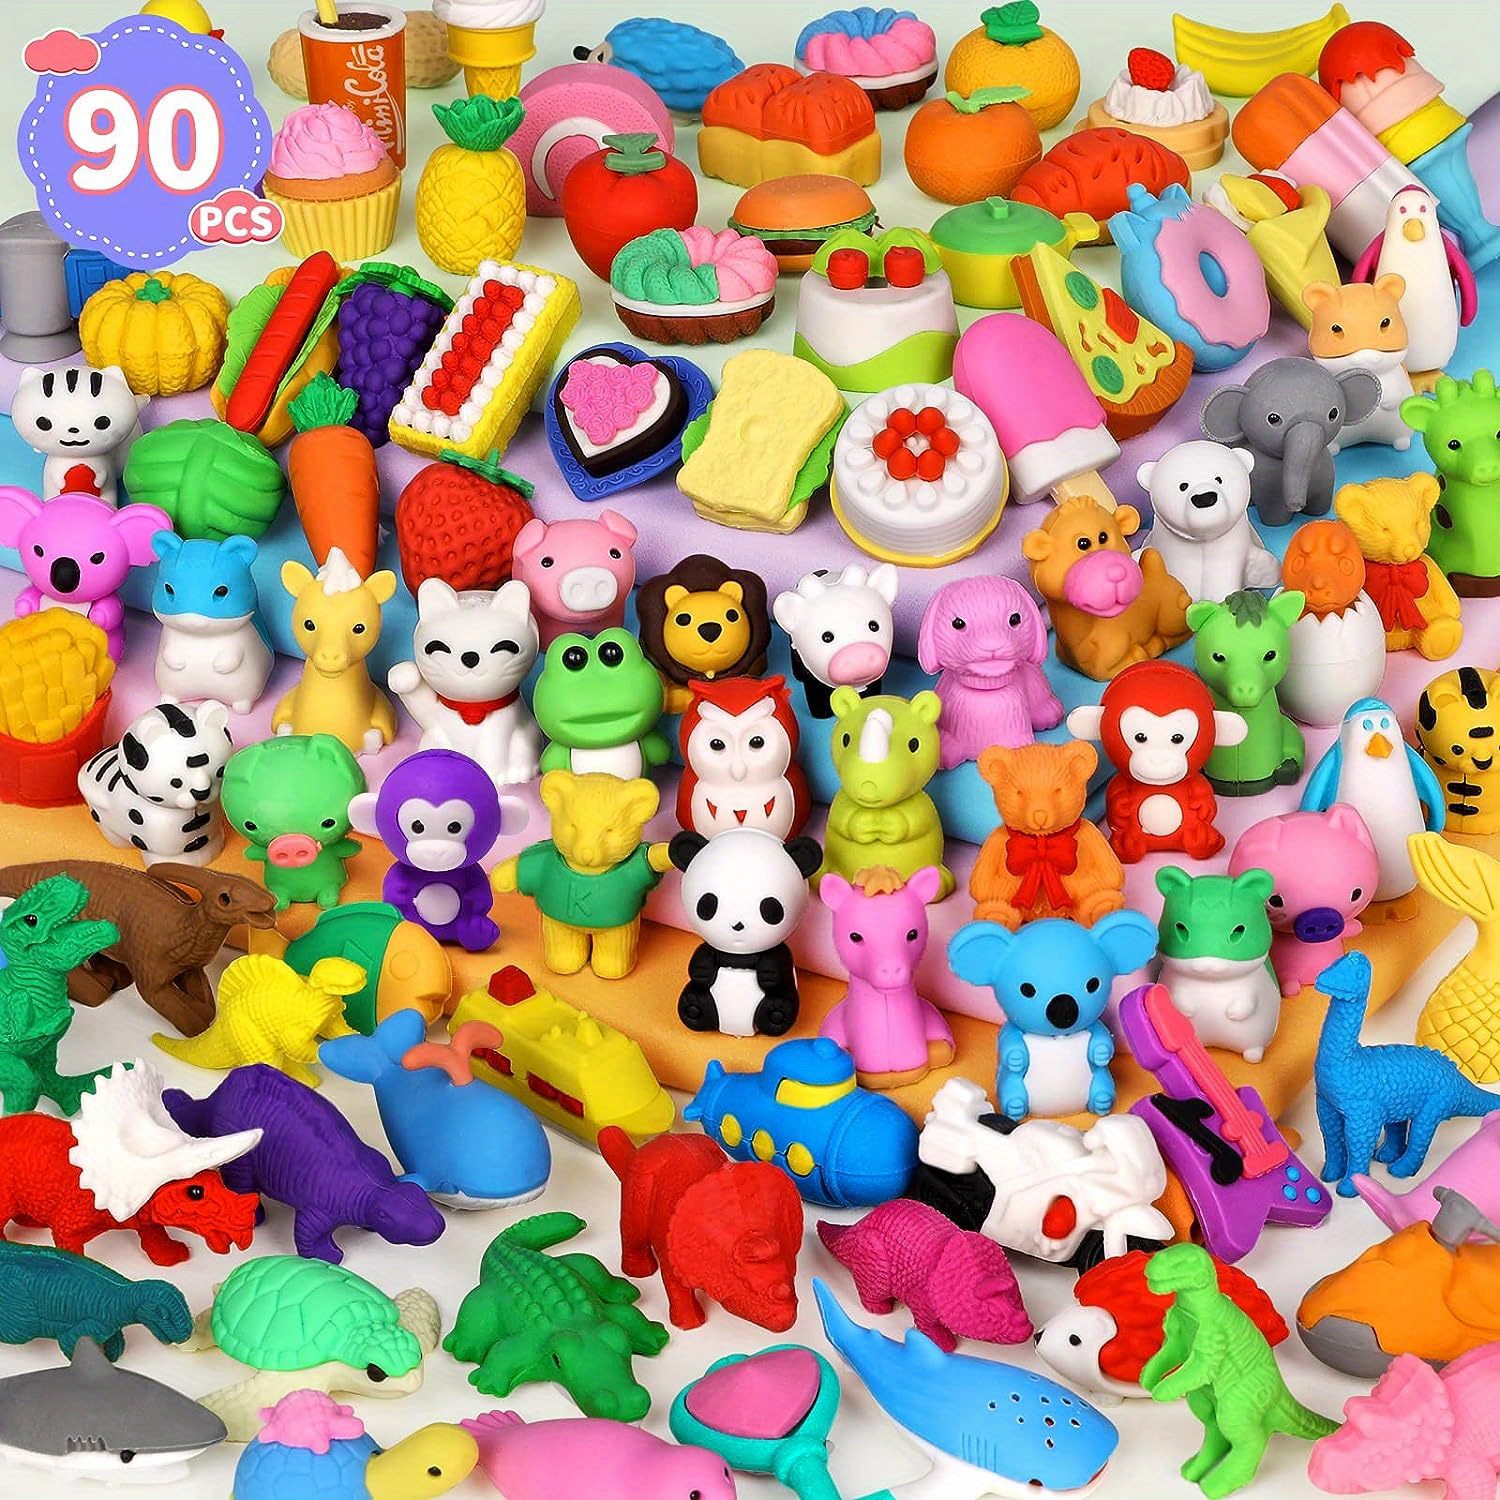 Fun Little Toys 60 Pcs Pencil Erasers Toy Set for Kids Classroom Prizes, Gifts for Kids, Bulk Puzzle Erasers for Party Favors Goodie Bag School